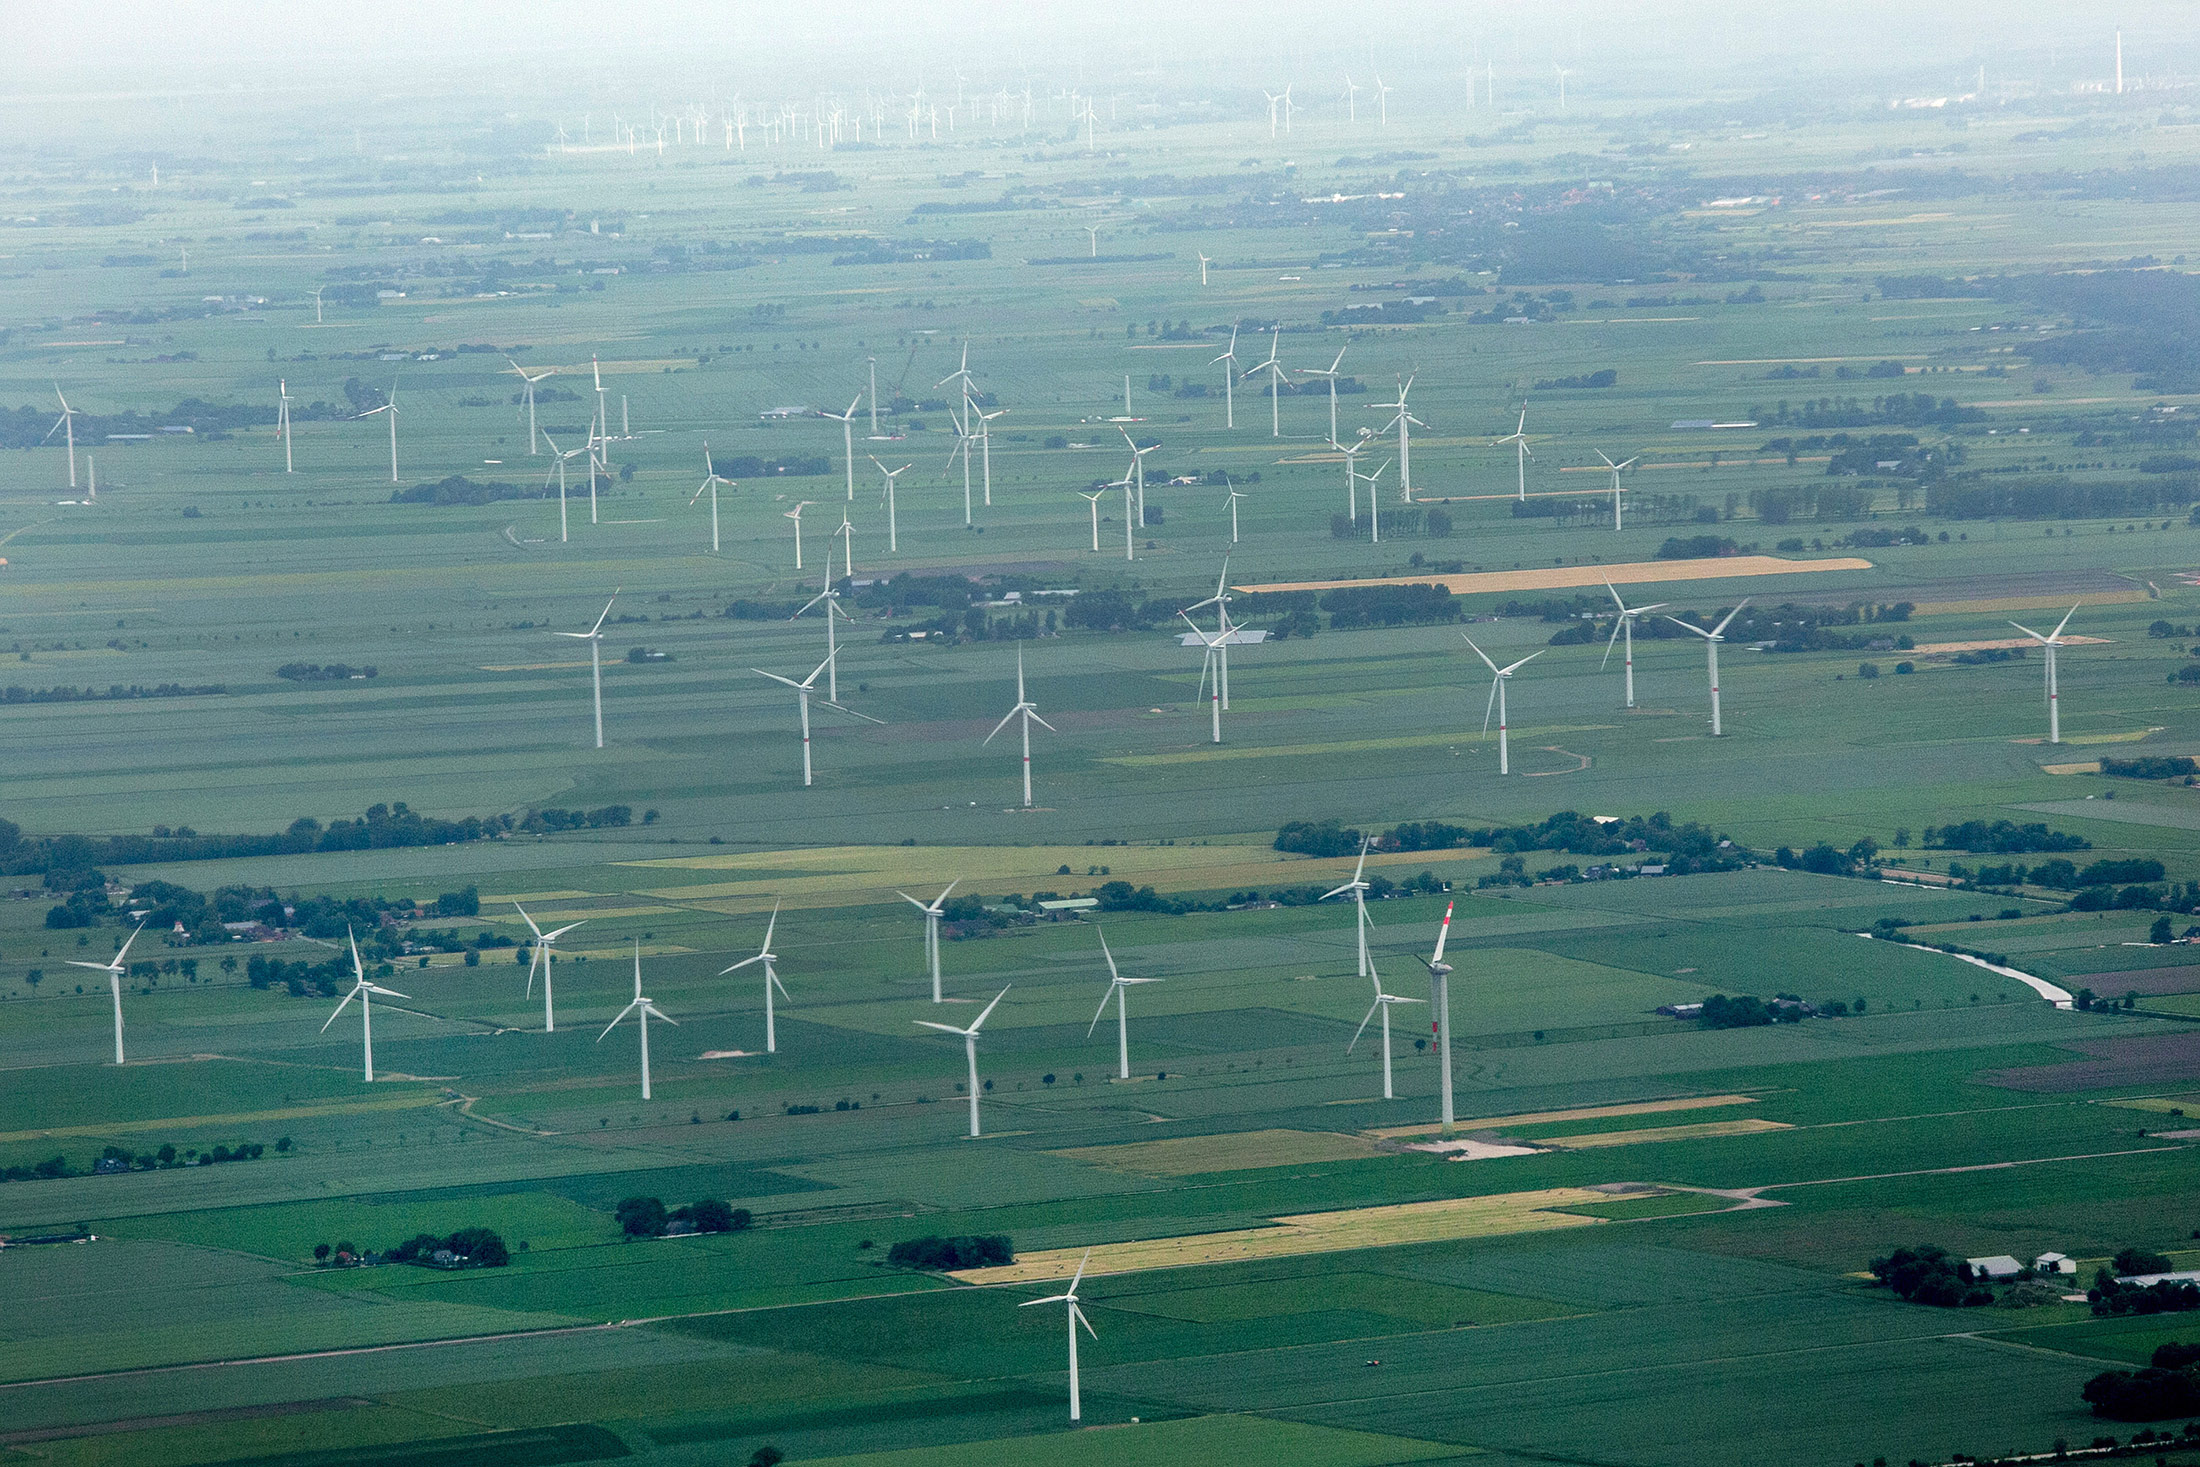 Wind turbines operate on onshore farm land sites in this aerial photograph taken near Hamburg.
